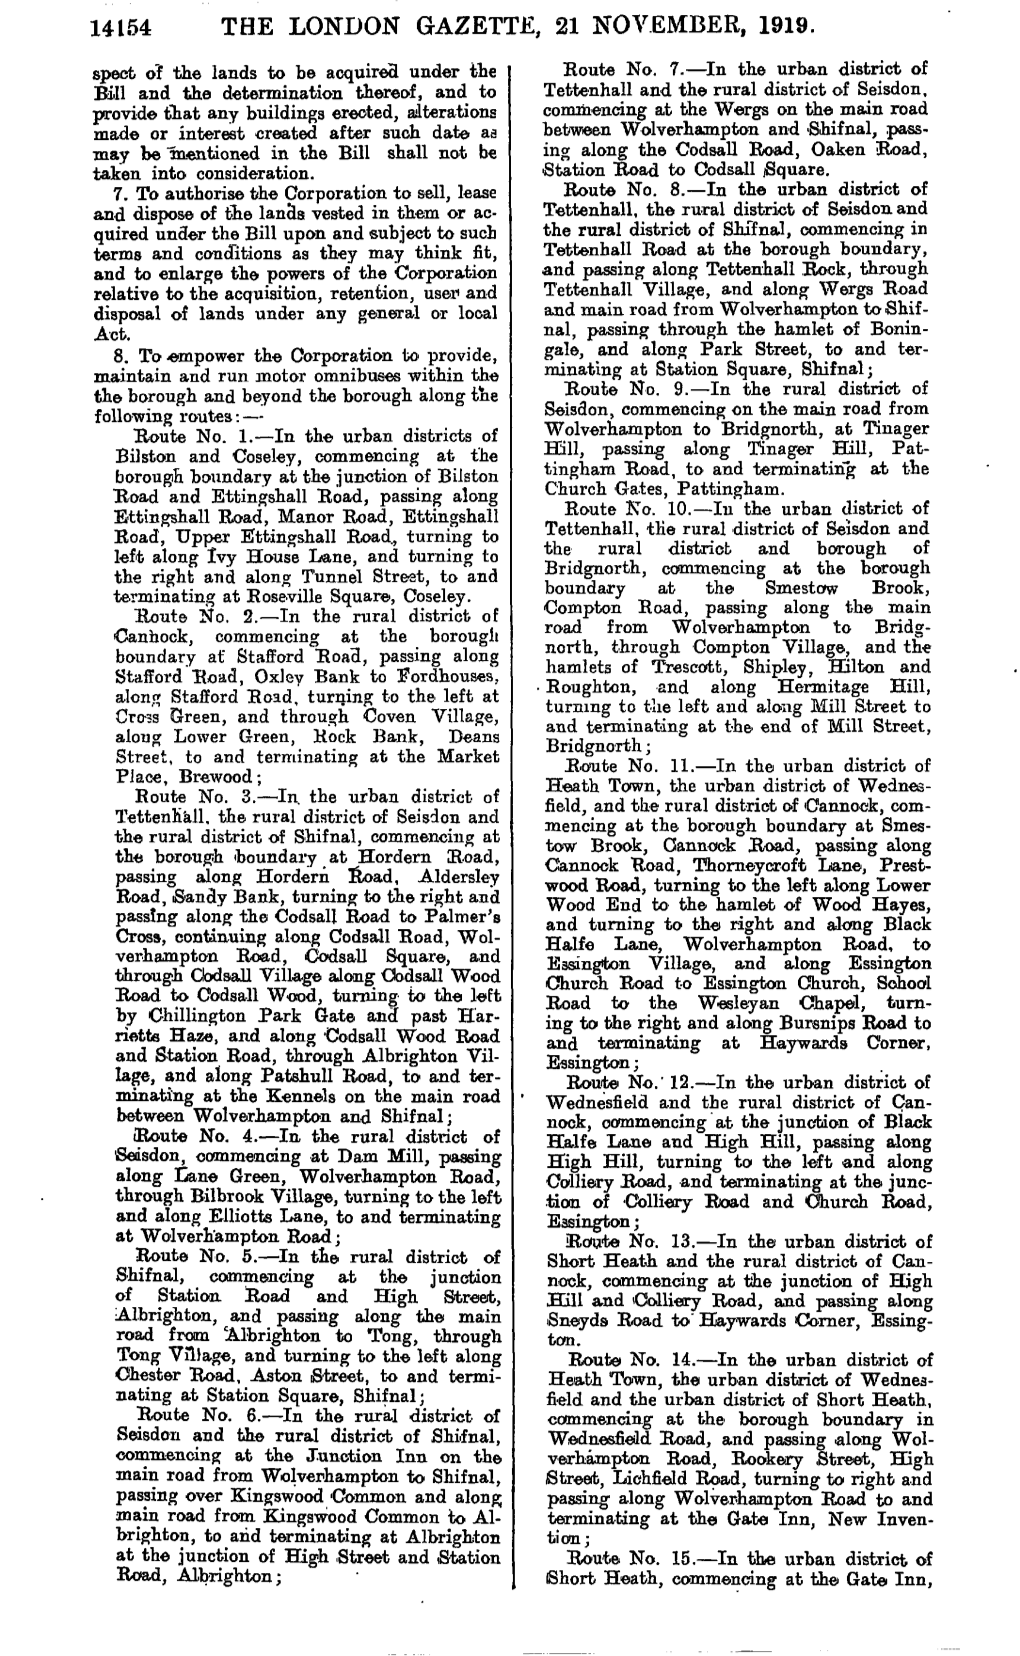 THE LONDON GAZETTE, 21 NOVEMBER, 1919. Spect O'f the Lands to Be Acquired Under the Route No